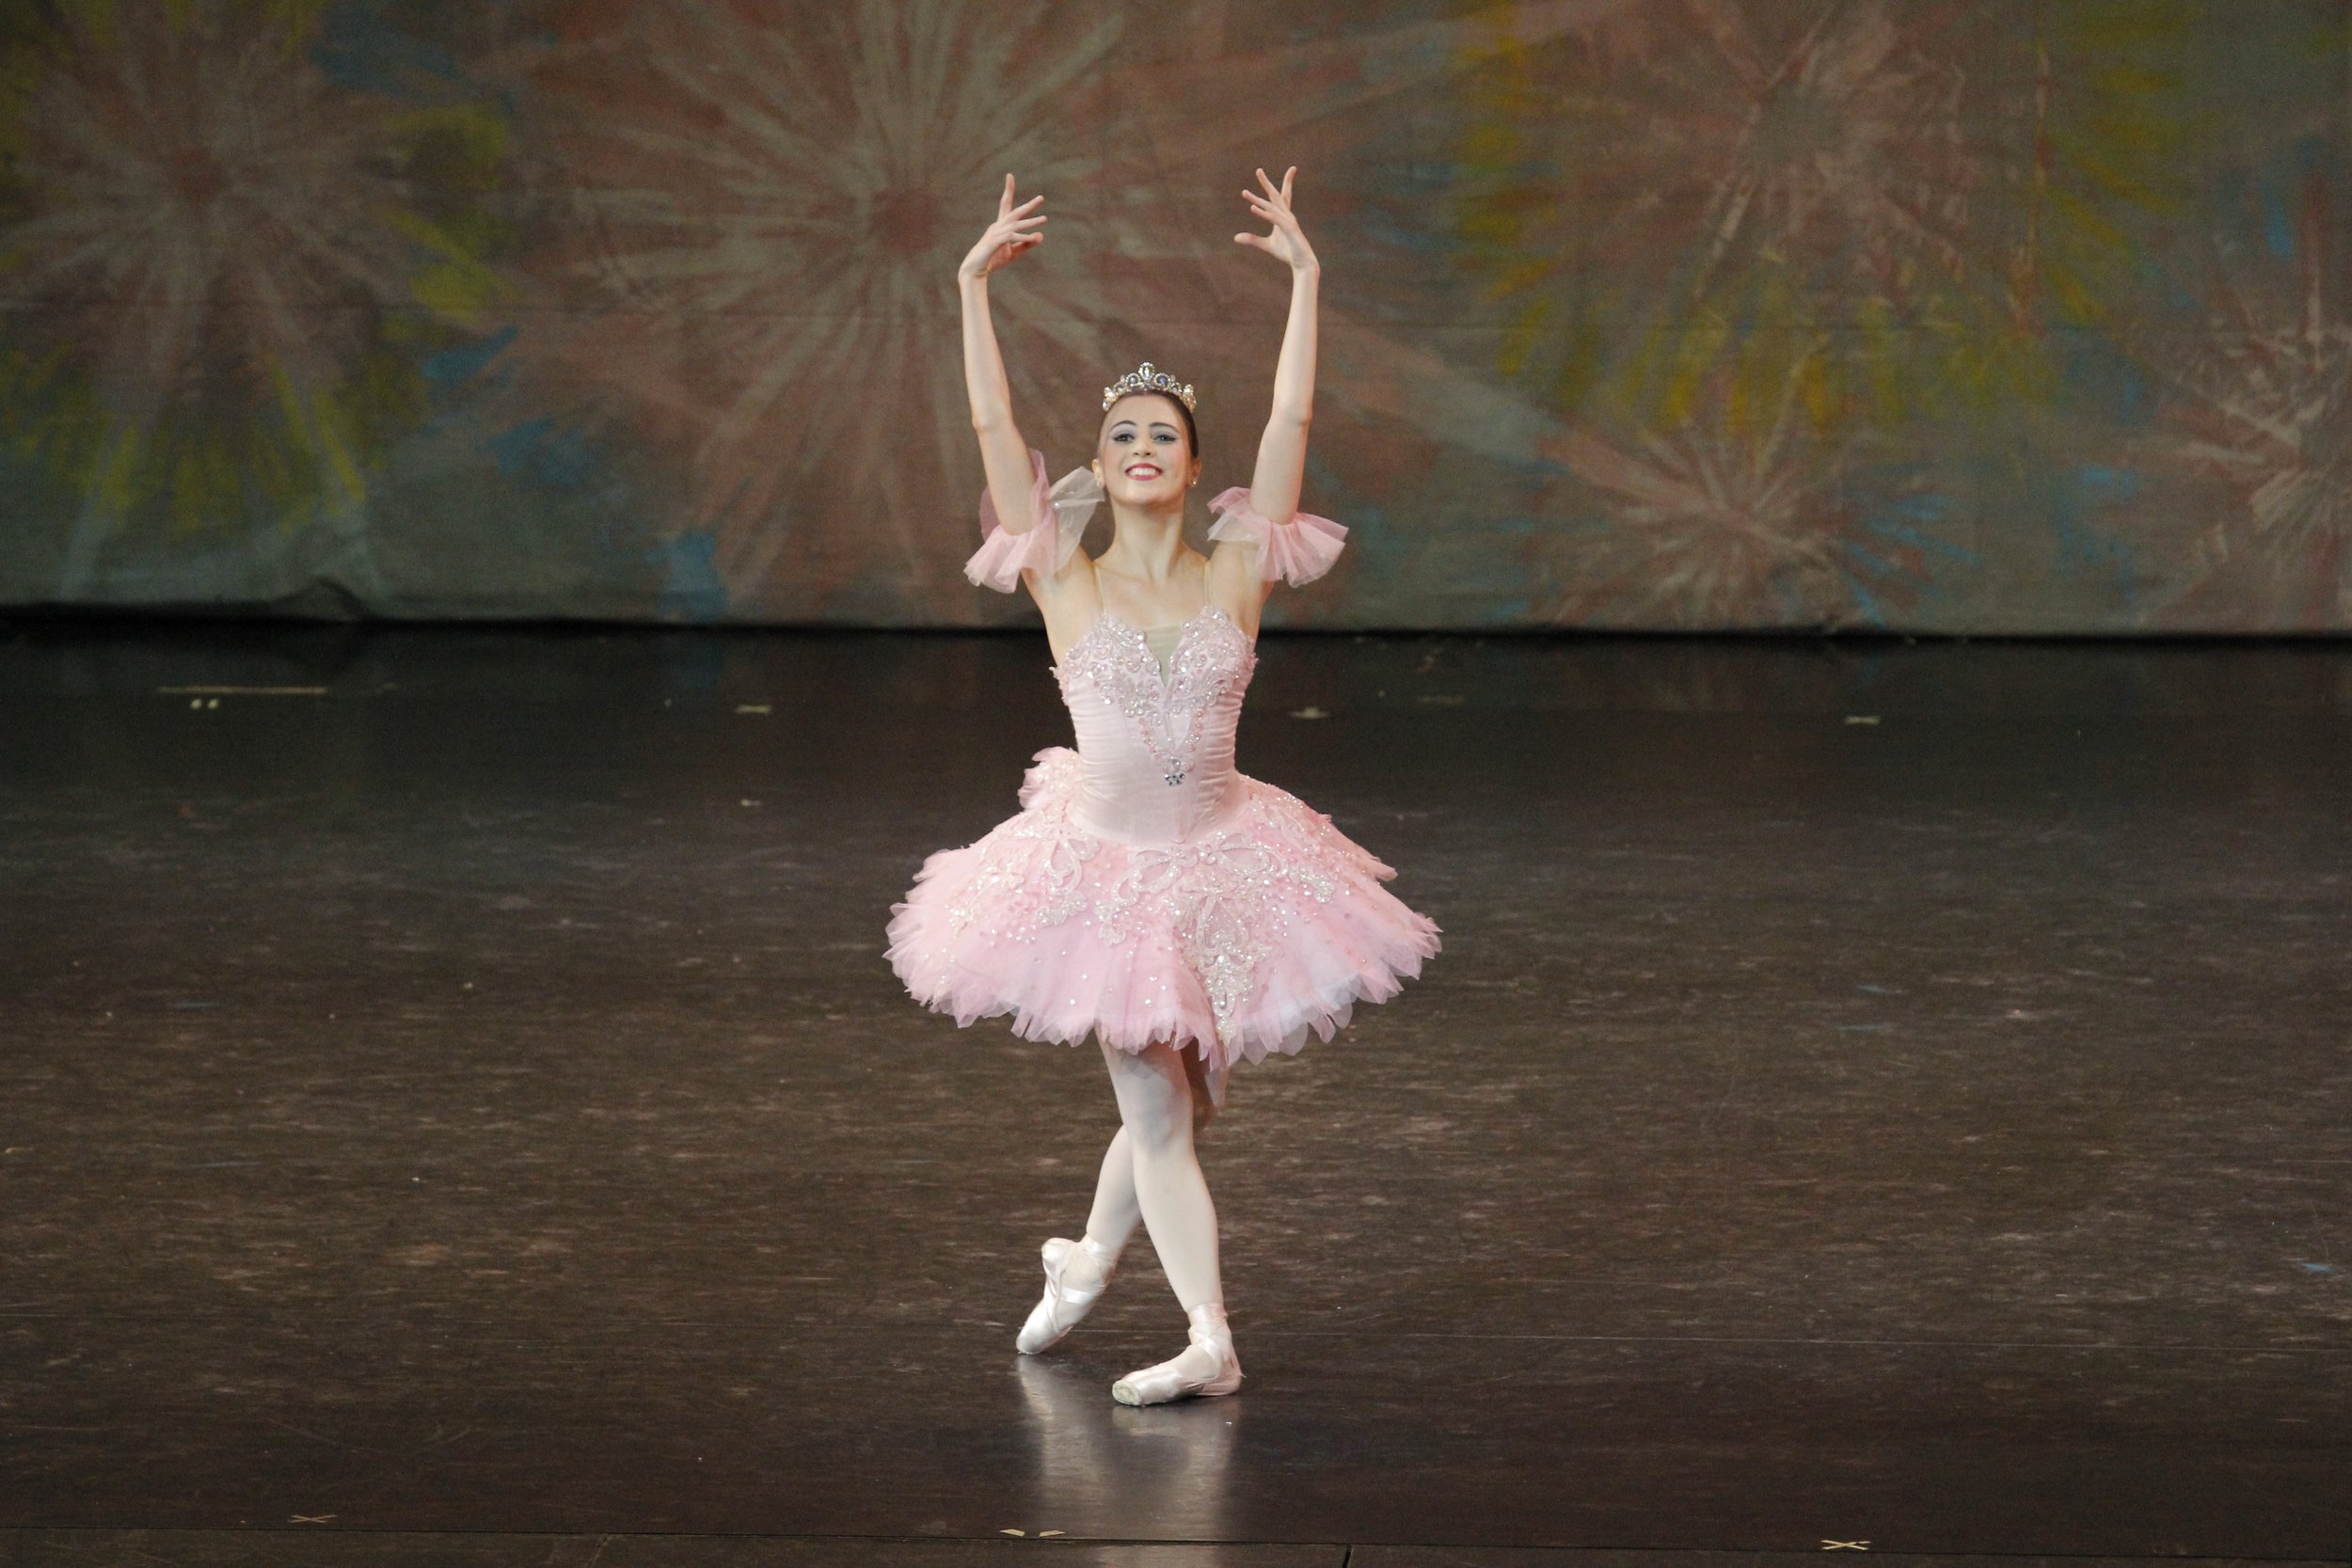    In the fabled Land of Sweets in  The Nutcracker,  the Sugar Plum Fairy (Katherine Barkman) reigns supreme. True to her name, she symbolizes everything that is sweet, delightful and enchanting. All these traits, along with her exquisite dancing, ea